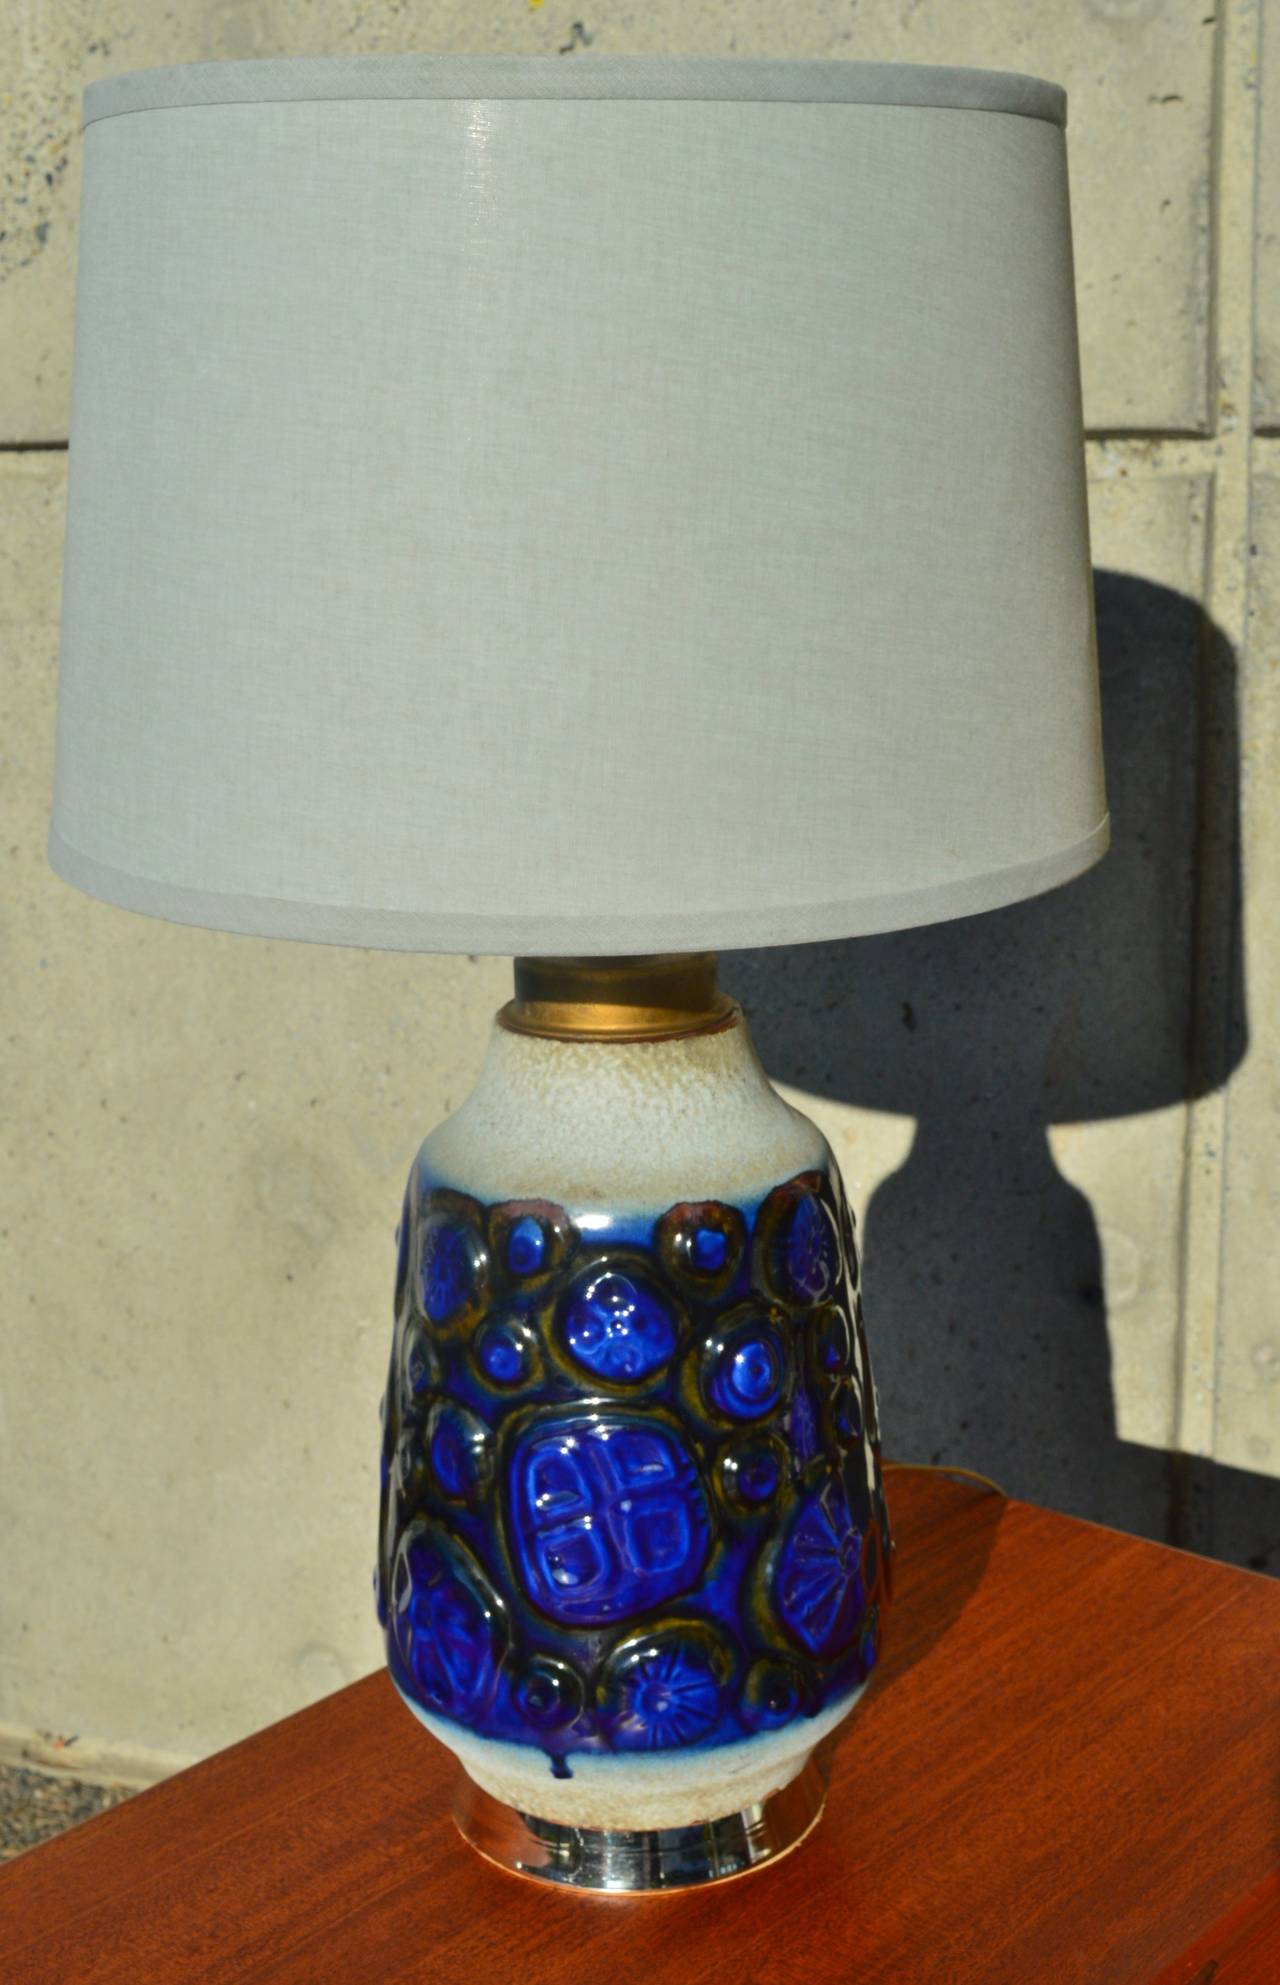 West German Carstens Textured Ceramic Lamp by Gerda Heuckeroth In Excellent Condition For Sale In New Westminster, British Columbia